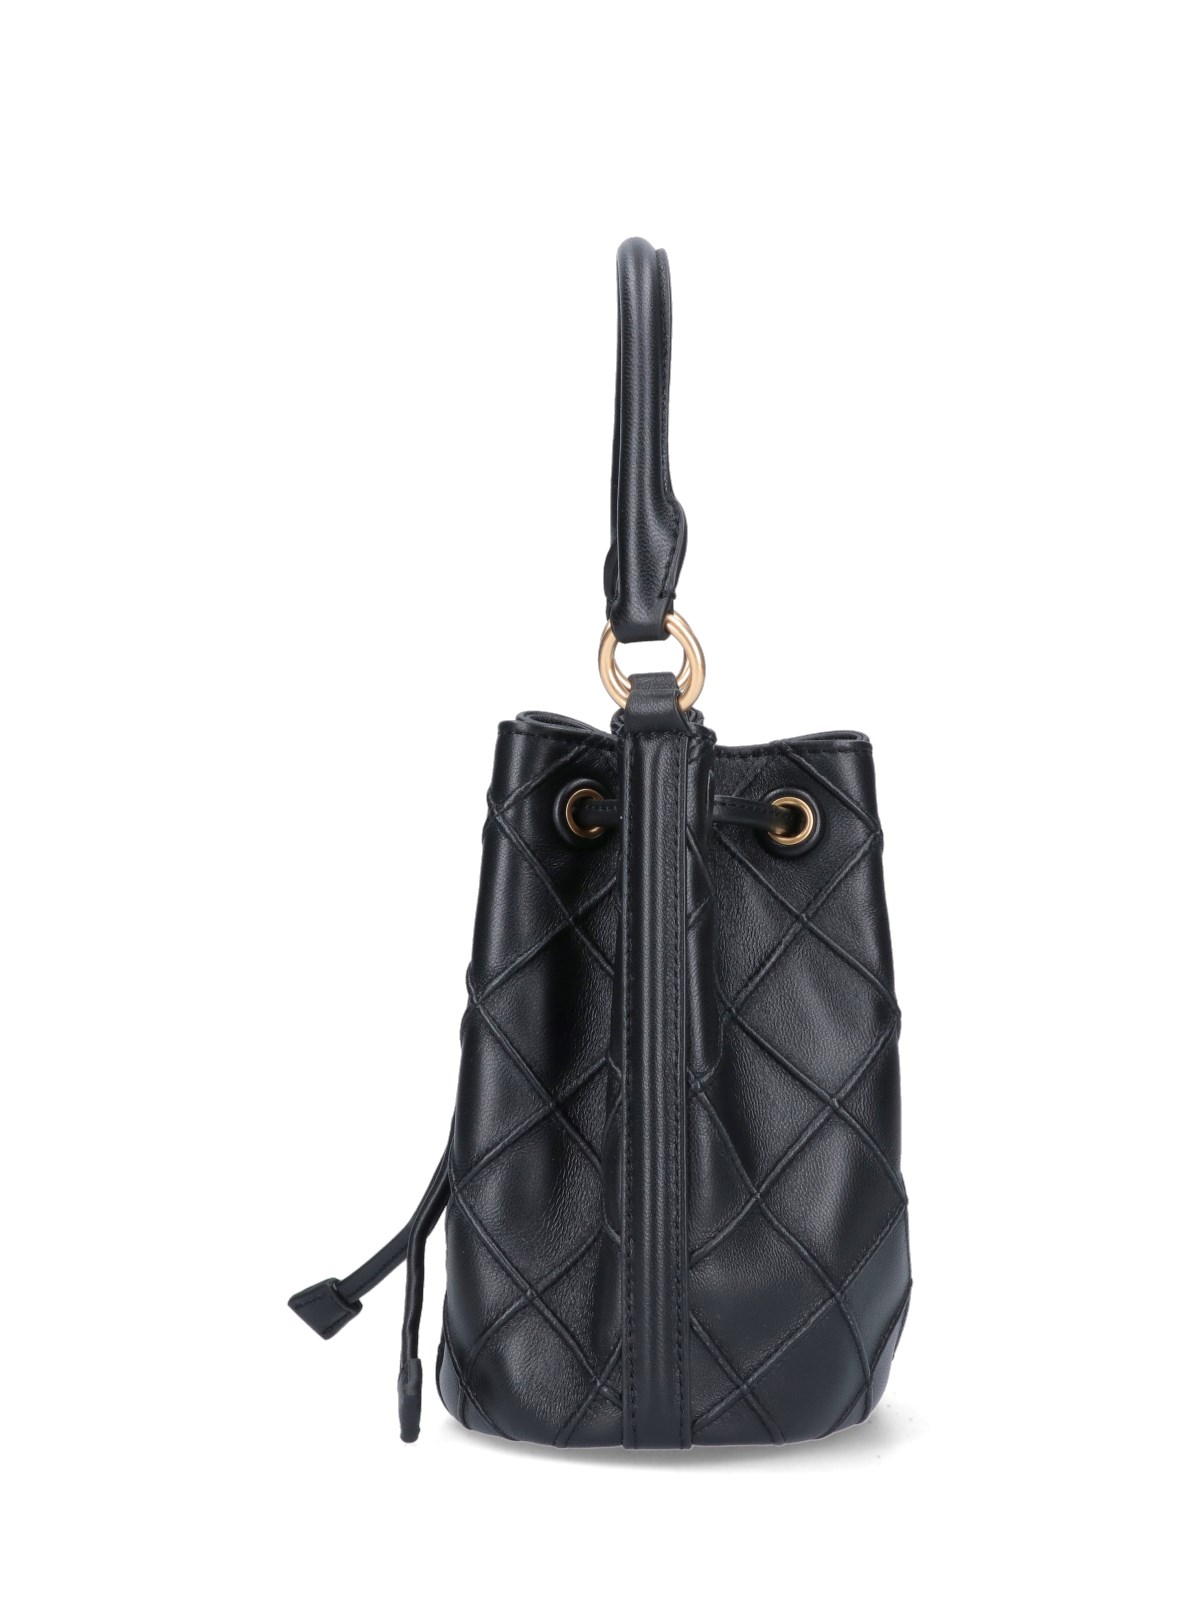 Tory burch 'fleming' small bucket bag available on SUGAR - 134254